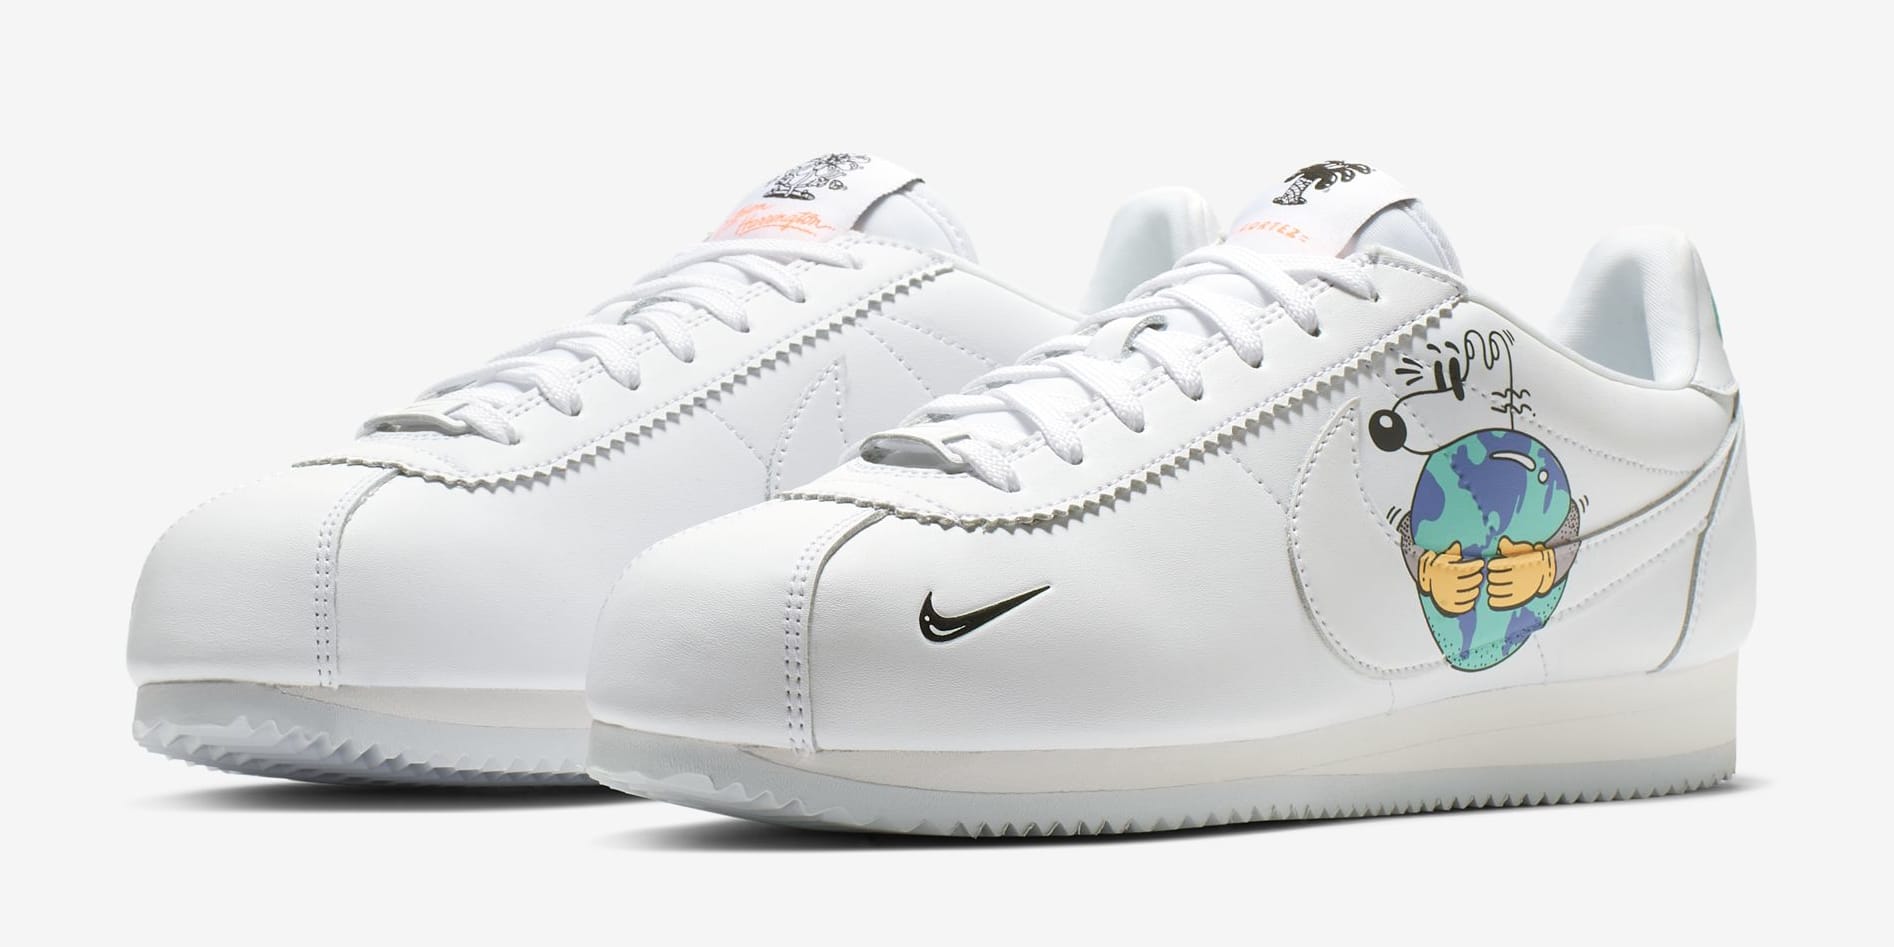 Nike Cortez Earth Day Collection Pair